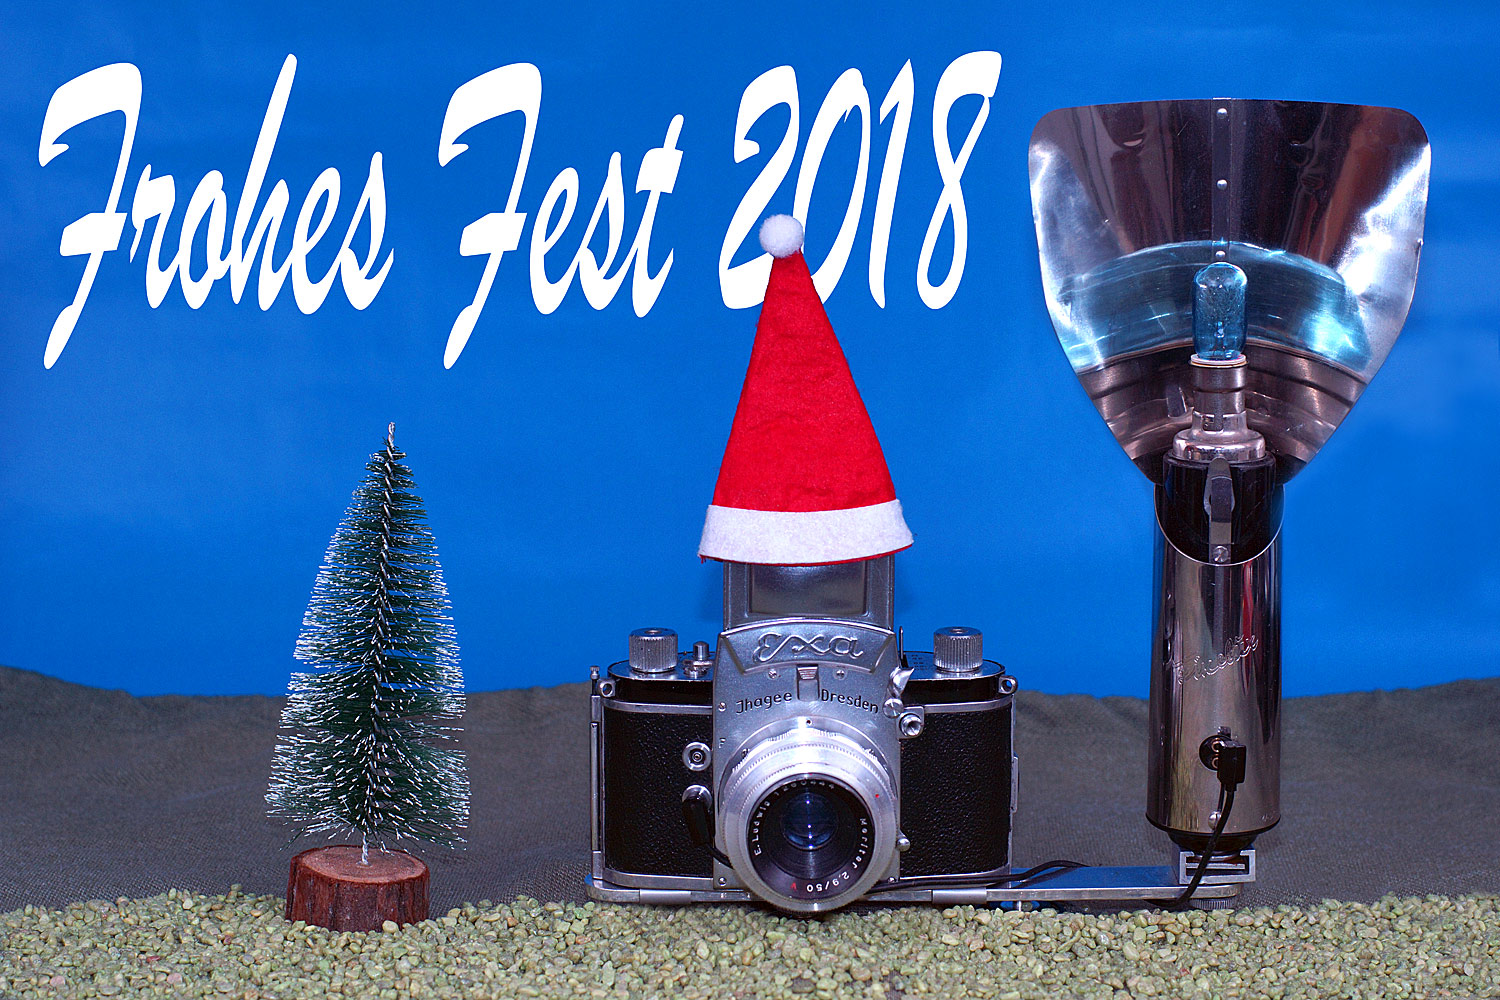 Frohes Fest 2018